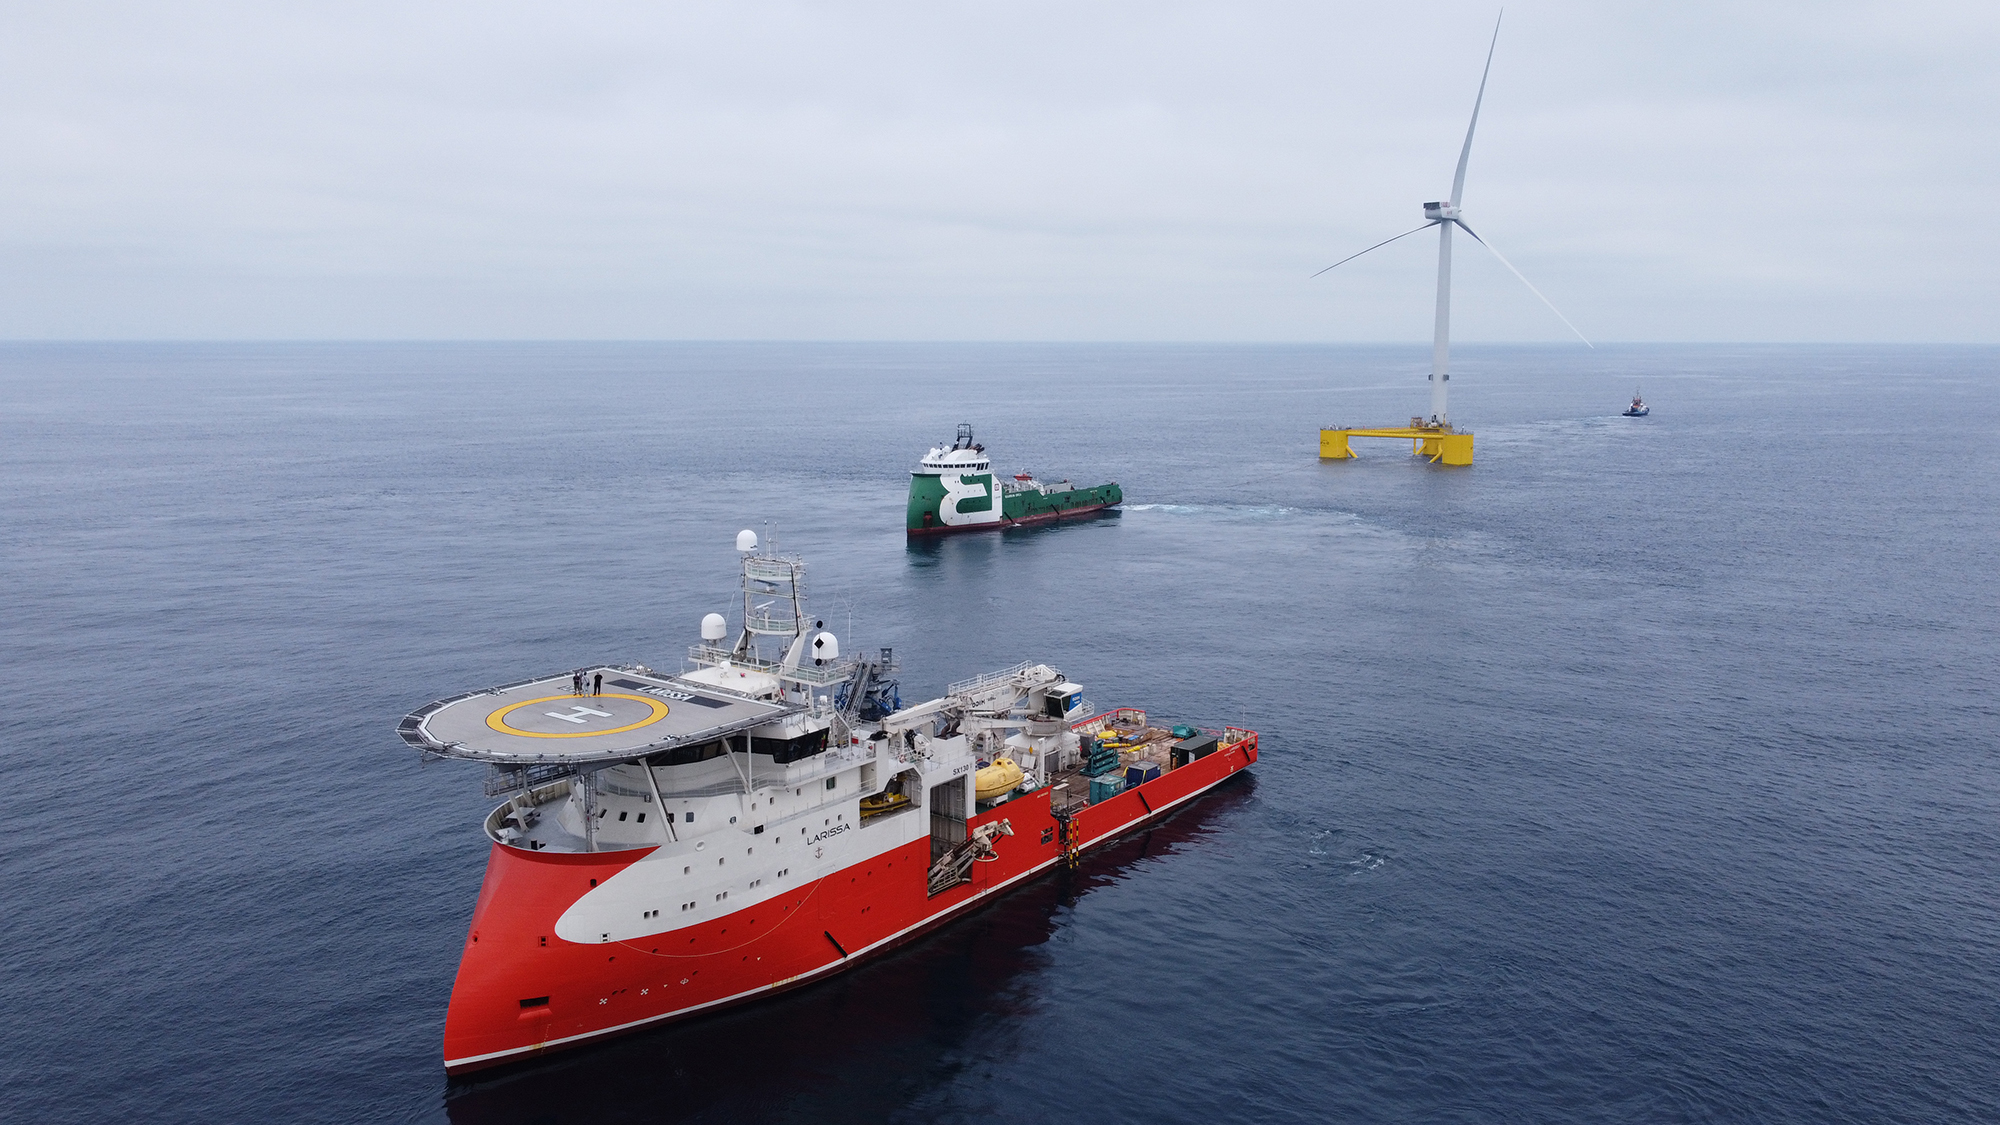 The IMR vessel 'Larissa' and AHTS vessel 'Bourbon Orca' involved in the installation of the 'Windfloat Atlantic' - the three largest floating offshore wind turbines to date.